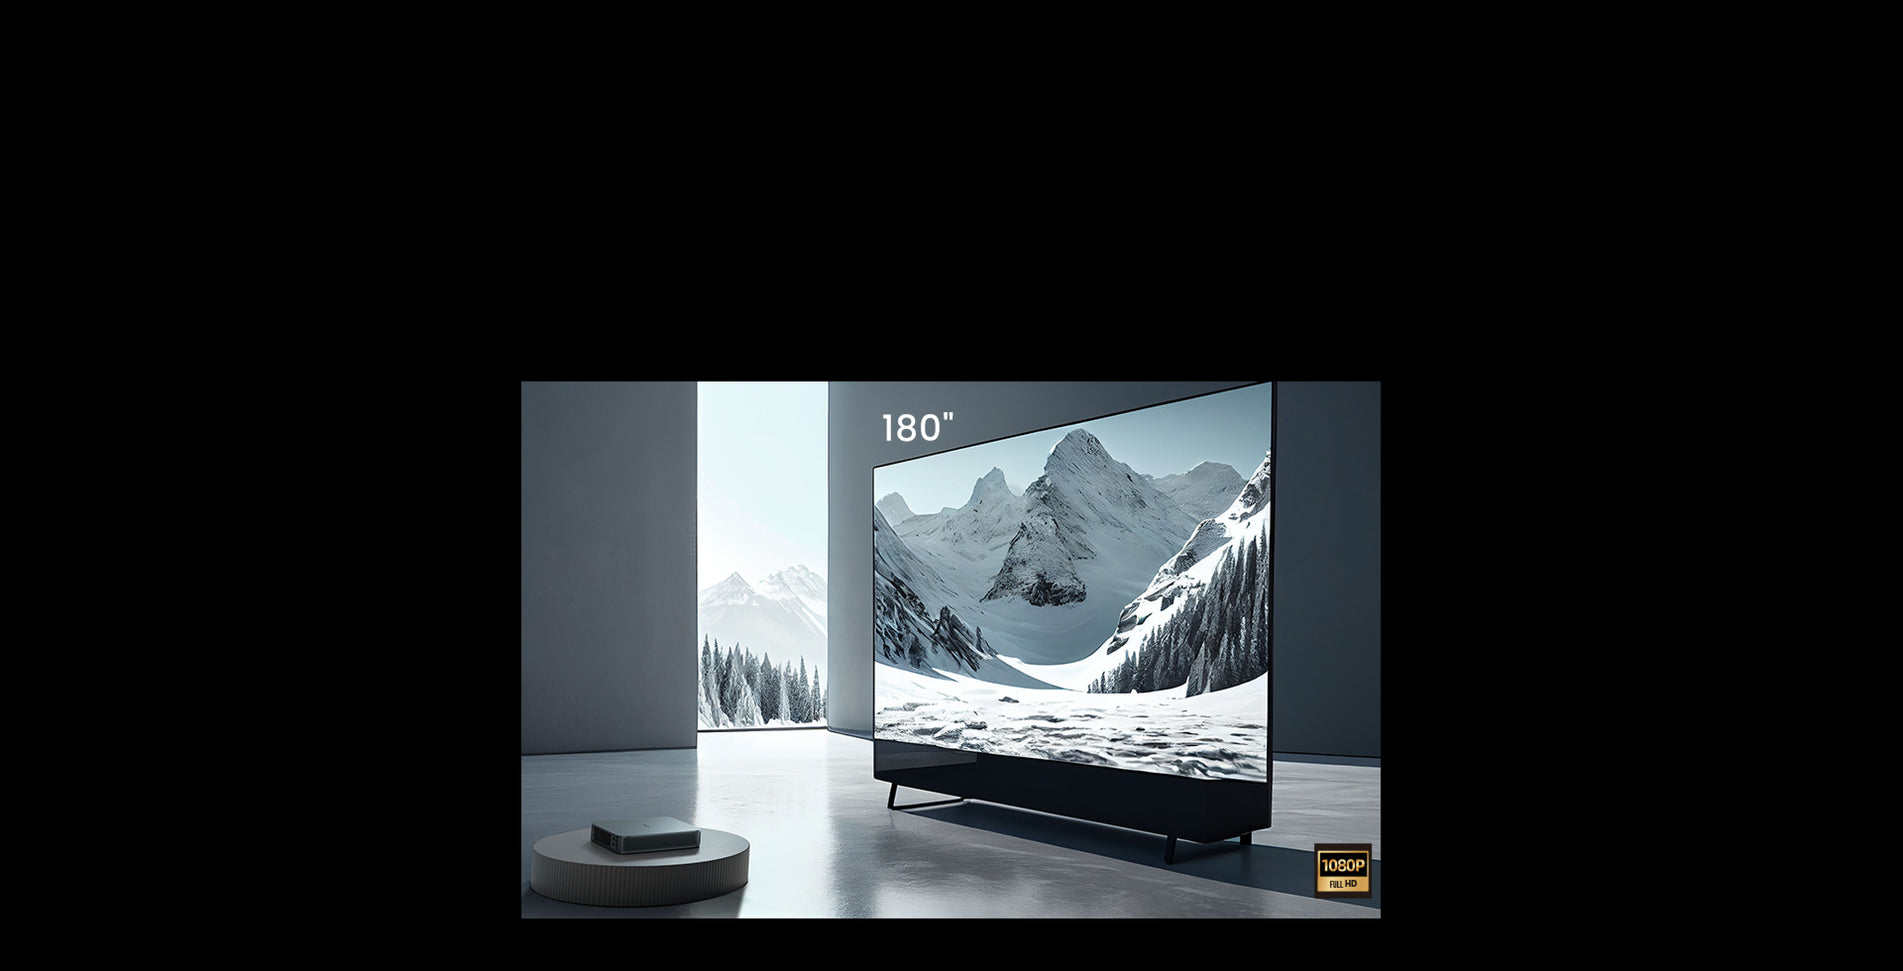 A spacious modern living room featuring a 180-inch projector screen with Full HD 1080p resolution displaying a stunning mountain landscape